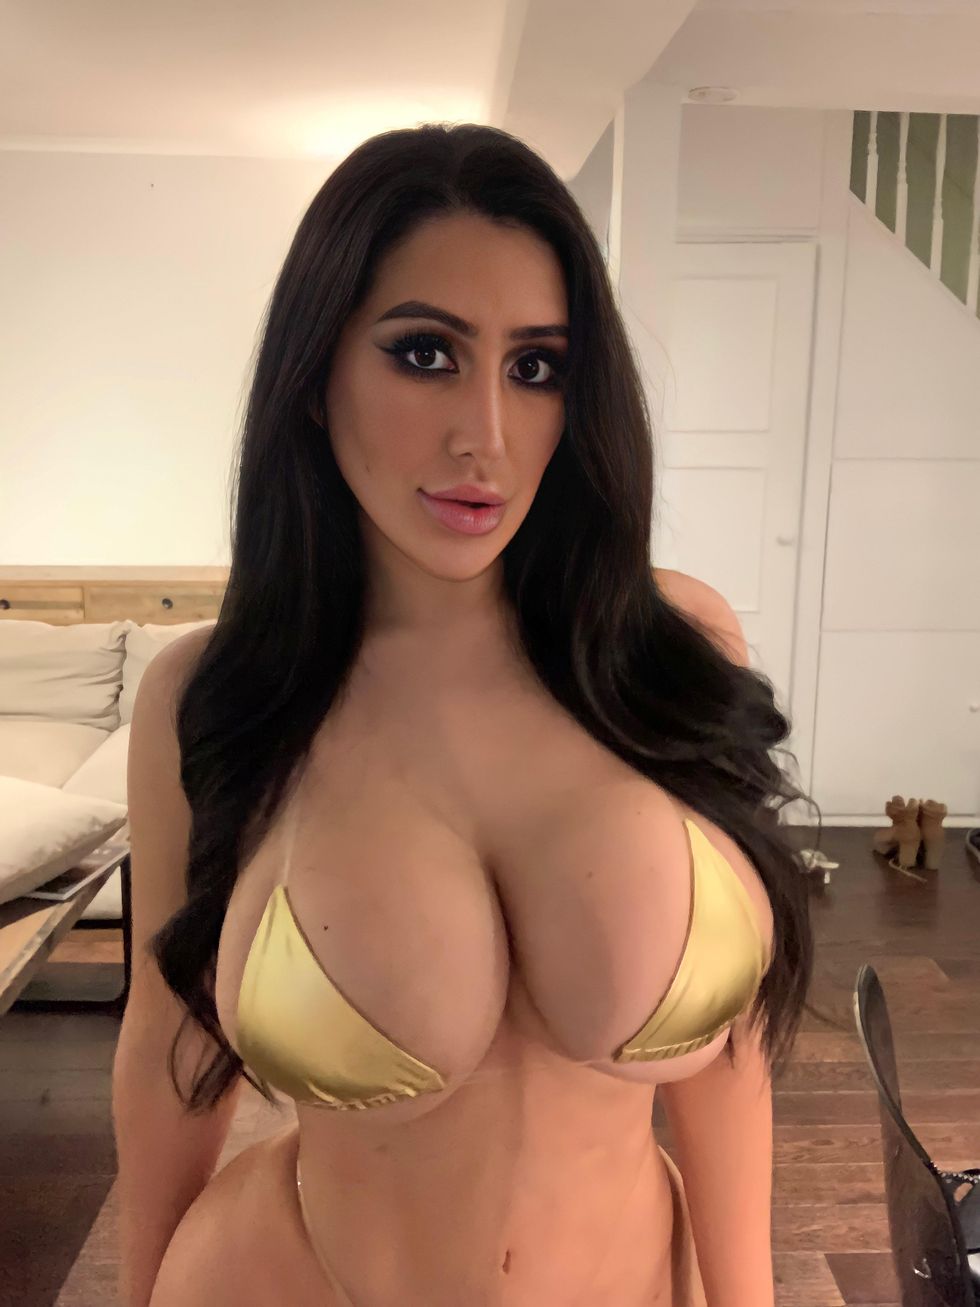 Woman Spends So Much Money Trying To Look Like Kim Kardashian That